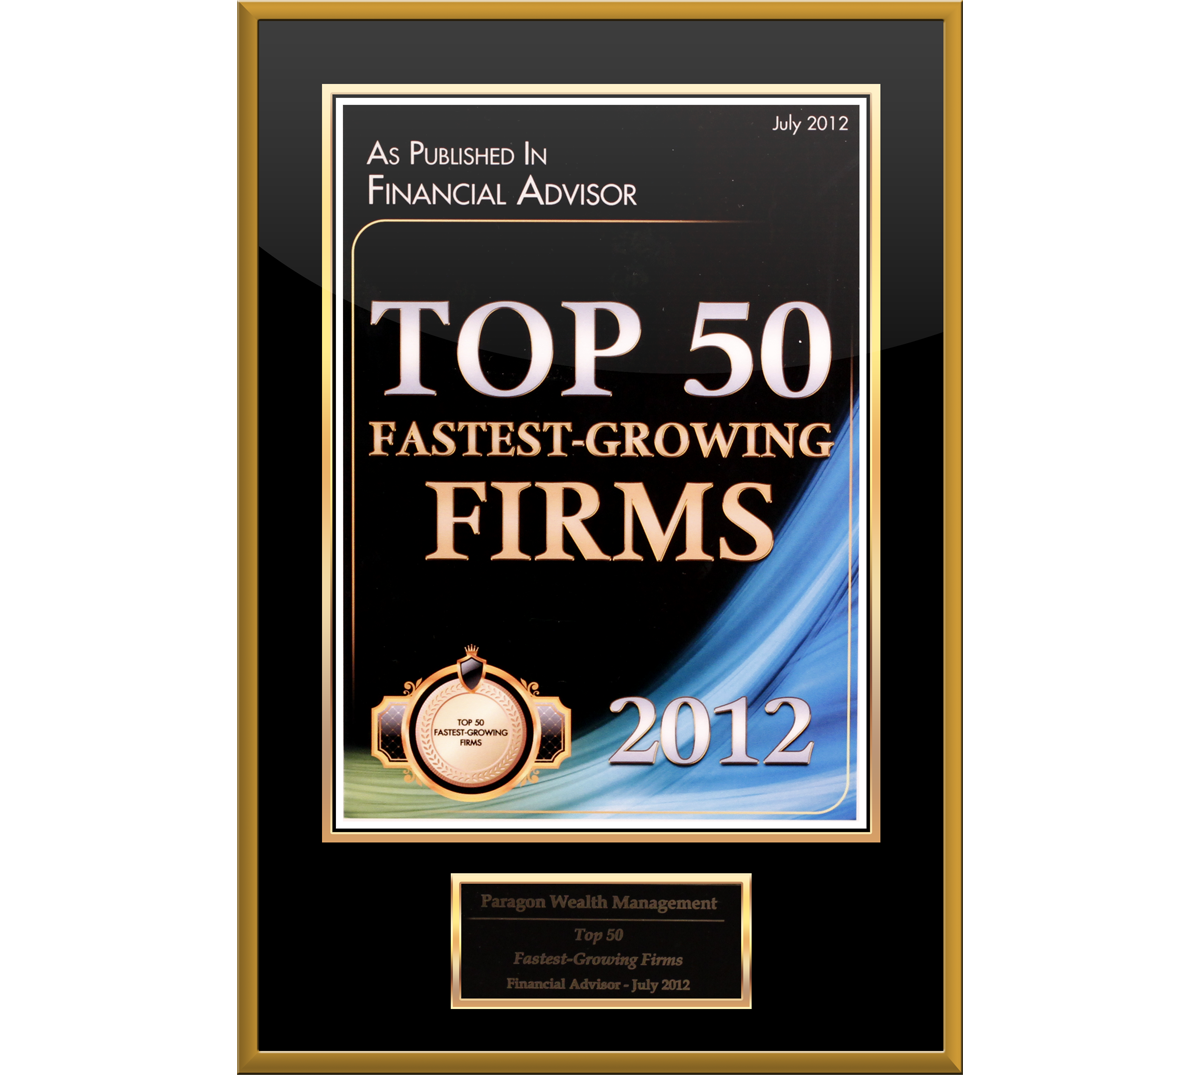 Paragon Wealth Management Listed as One of the Top 50 Fastest Growing Firms in the U.S. by Financial Advisor Magazine